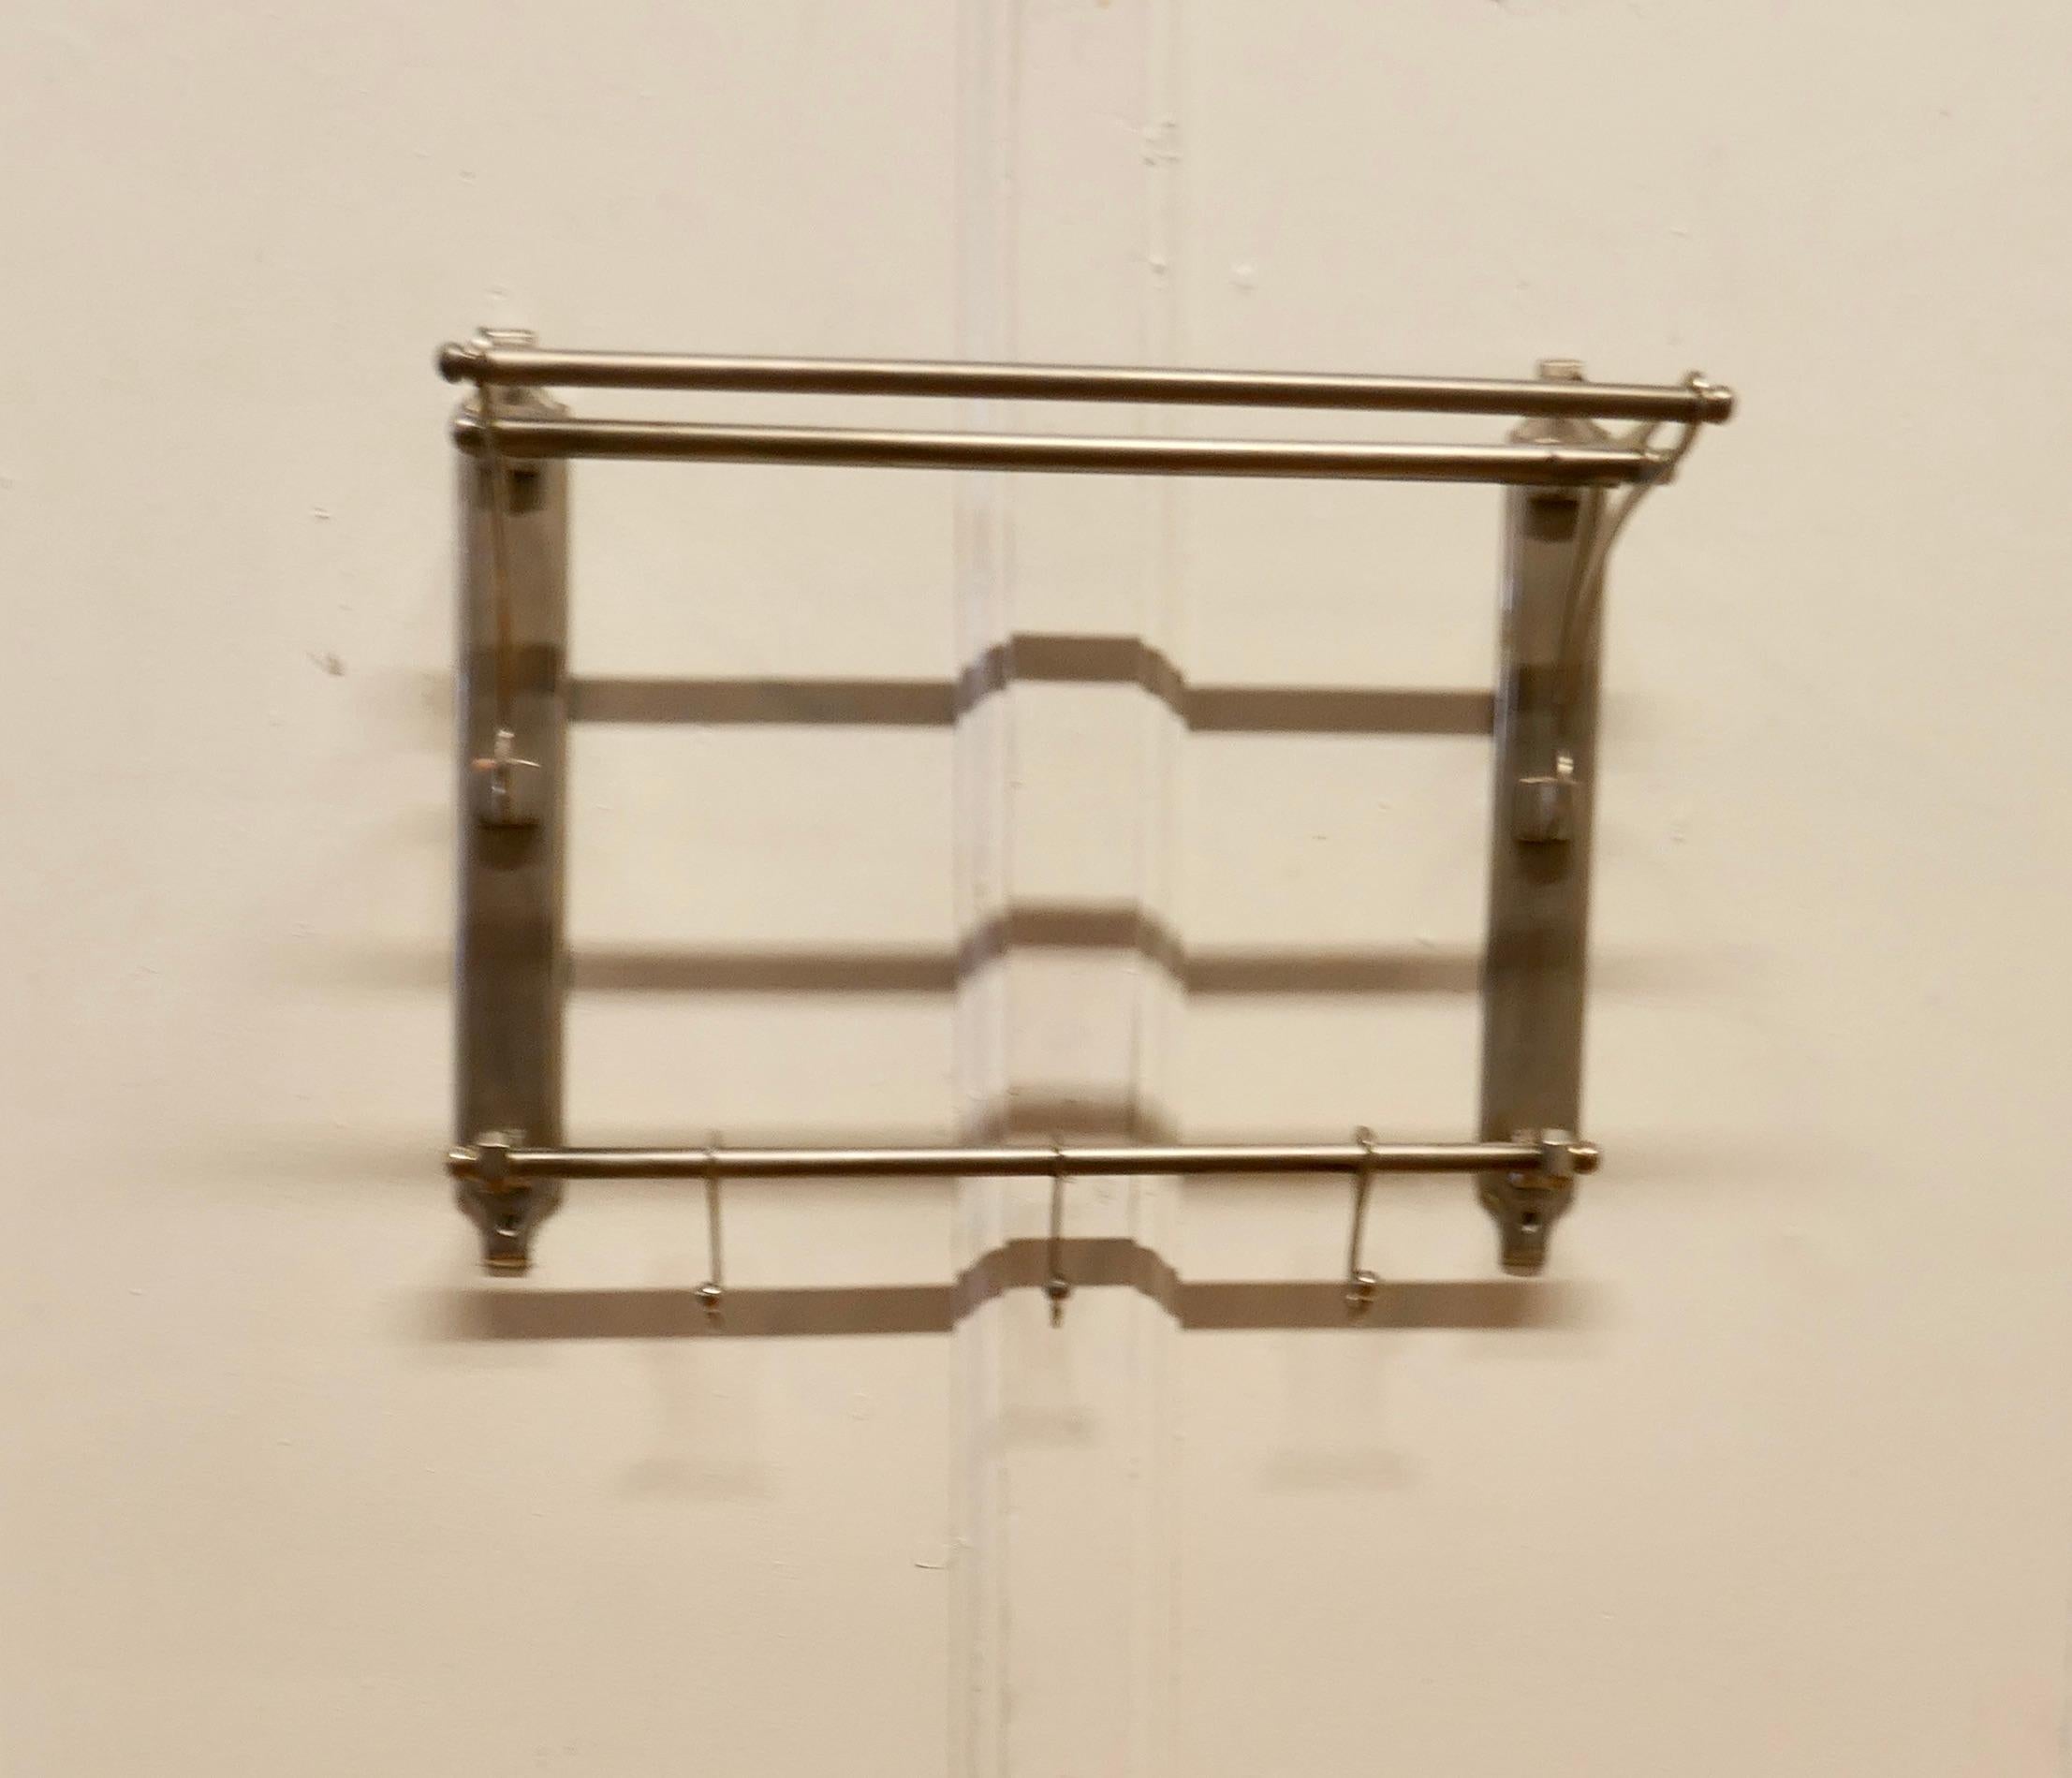 Steel Small French Art Deco Hat and Coat Rack, Pullman Railway Train Style